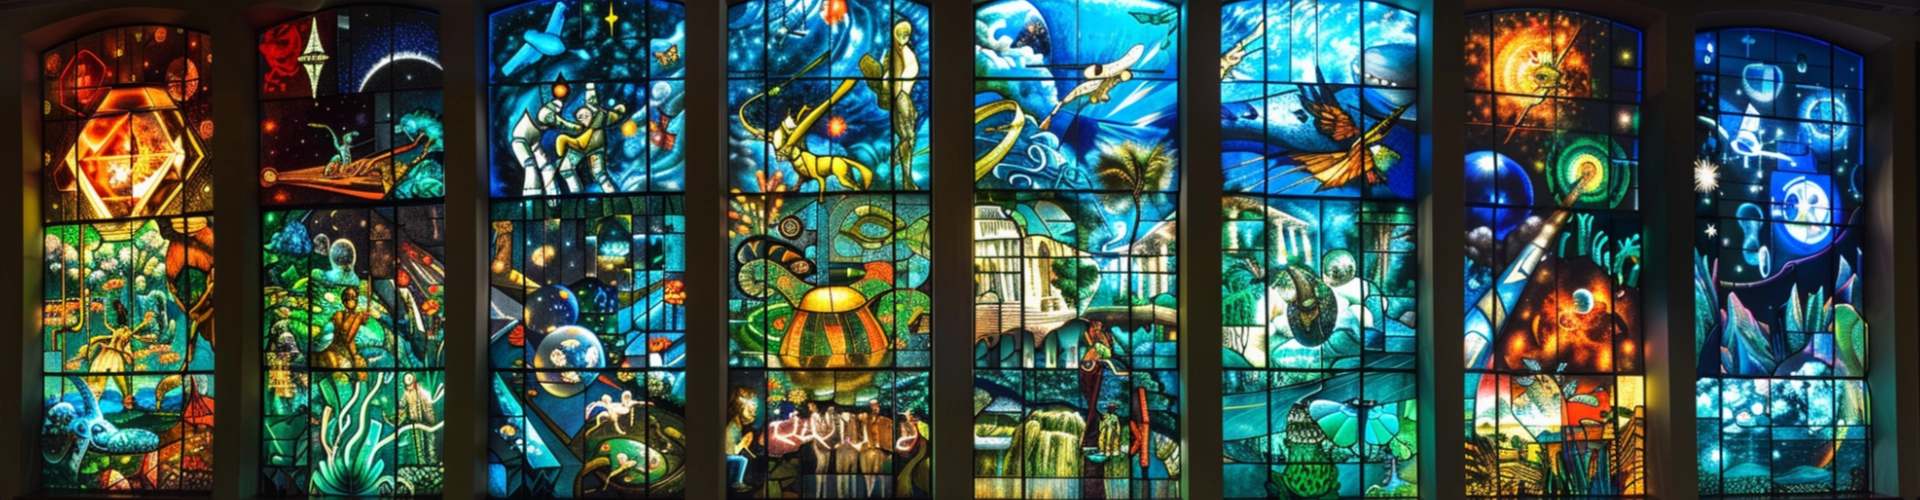 stained glass painting showing stylistic scenes of cultural events